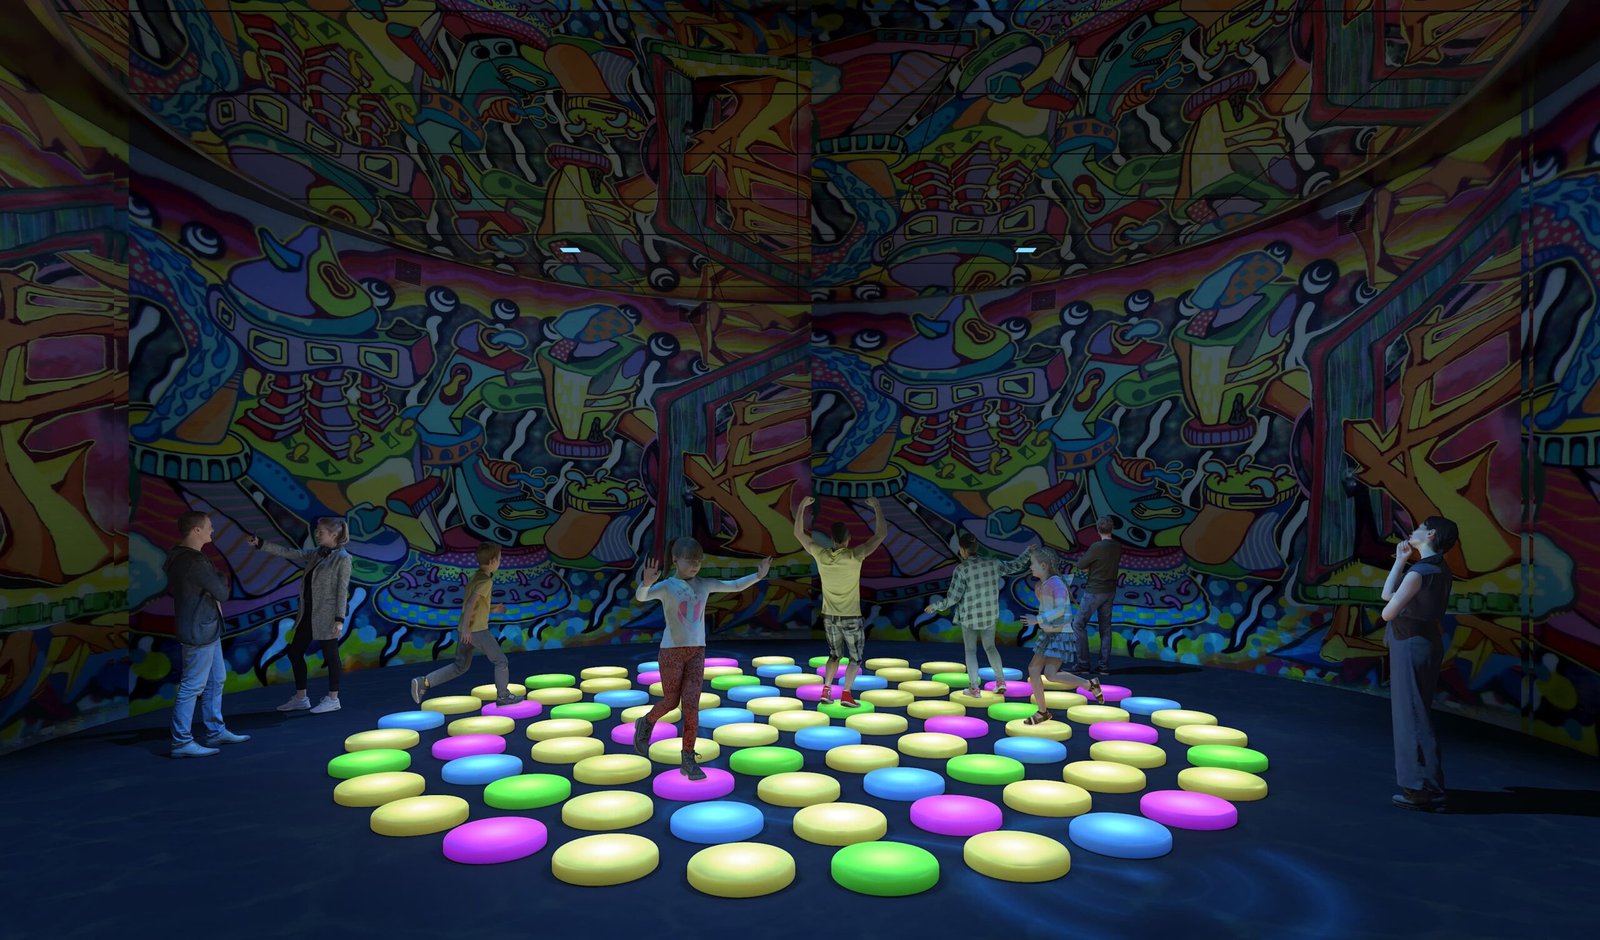 Interactive LED Floor Tiles in a Graffiti Room